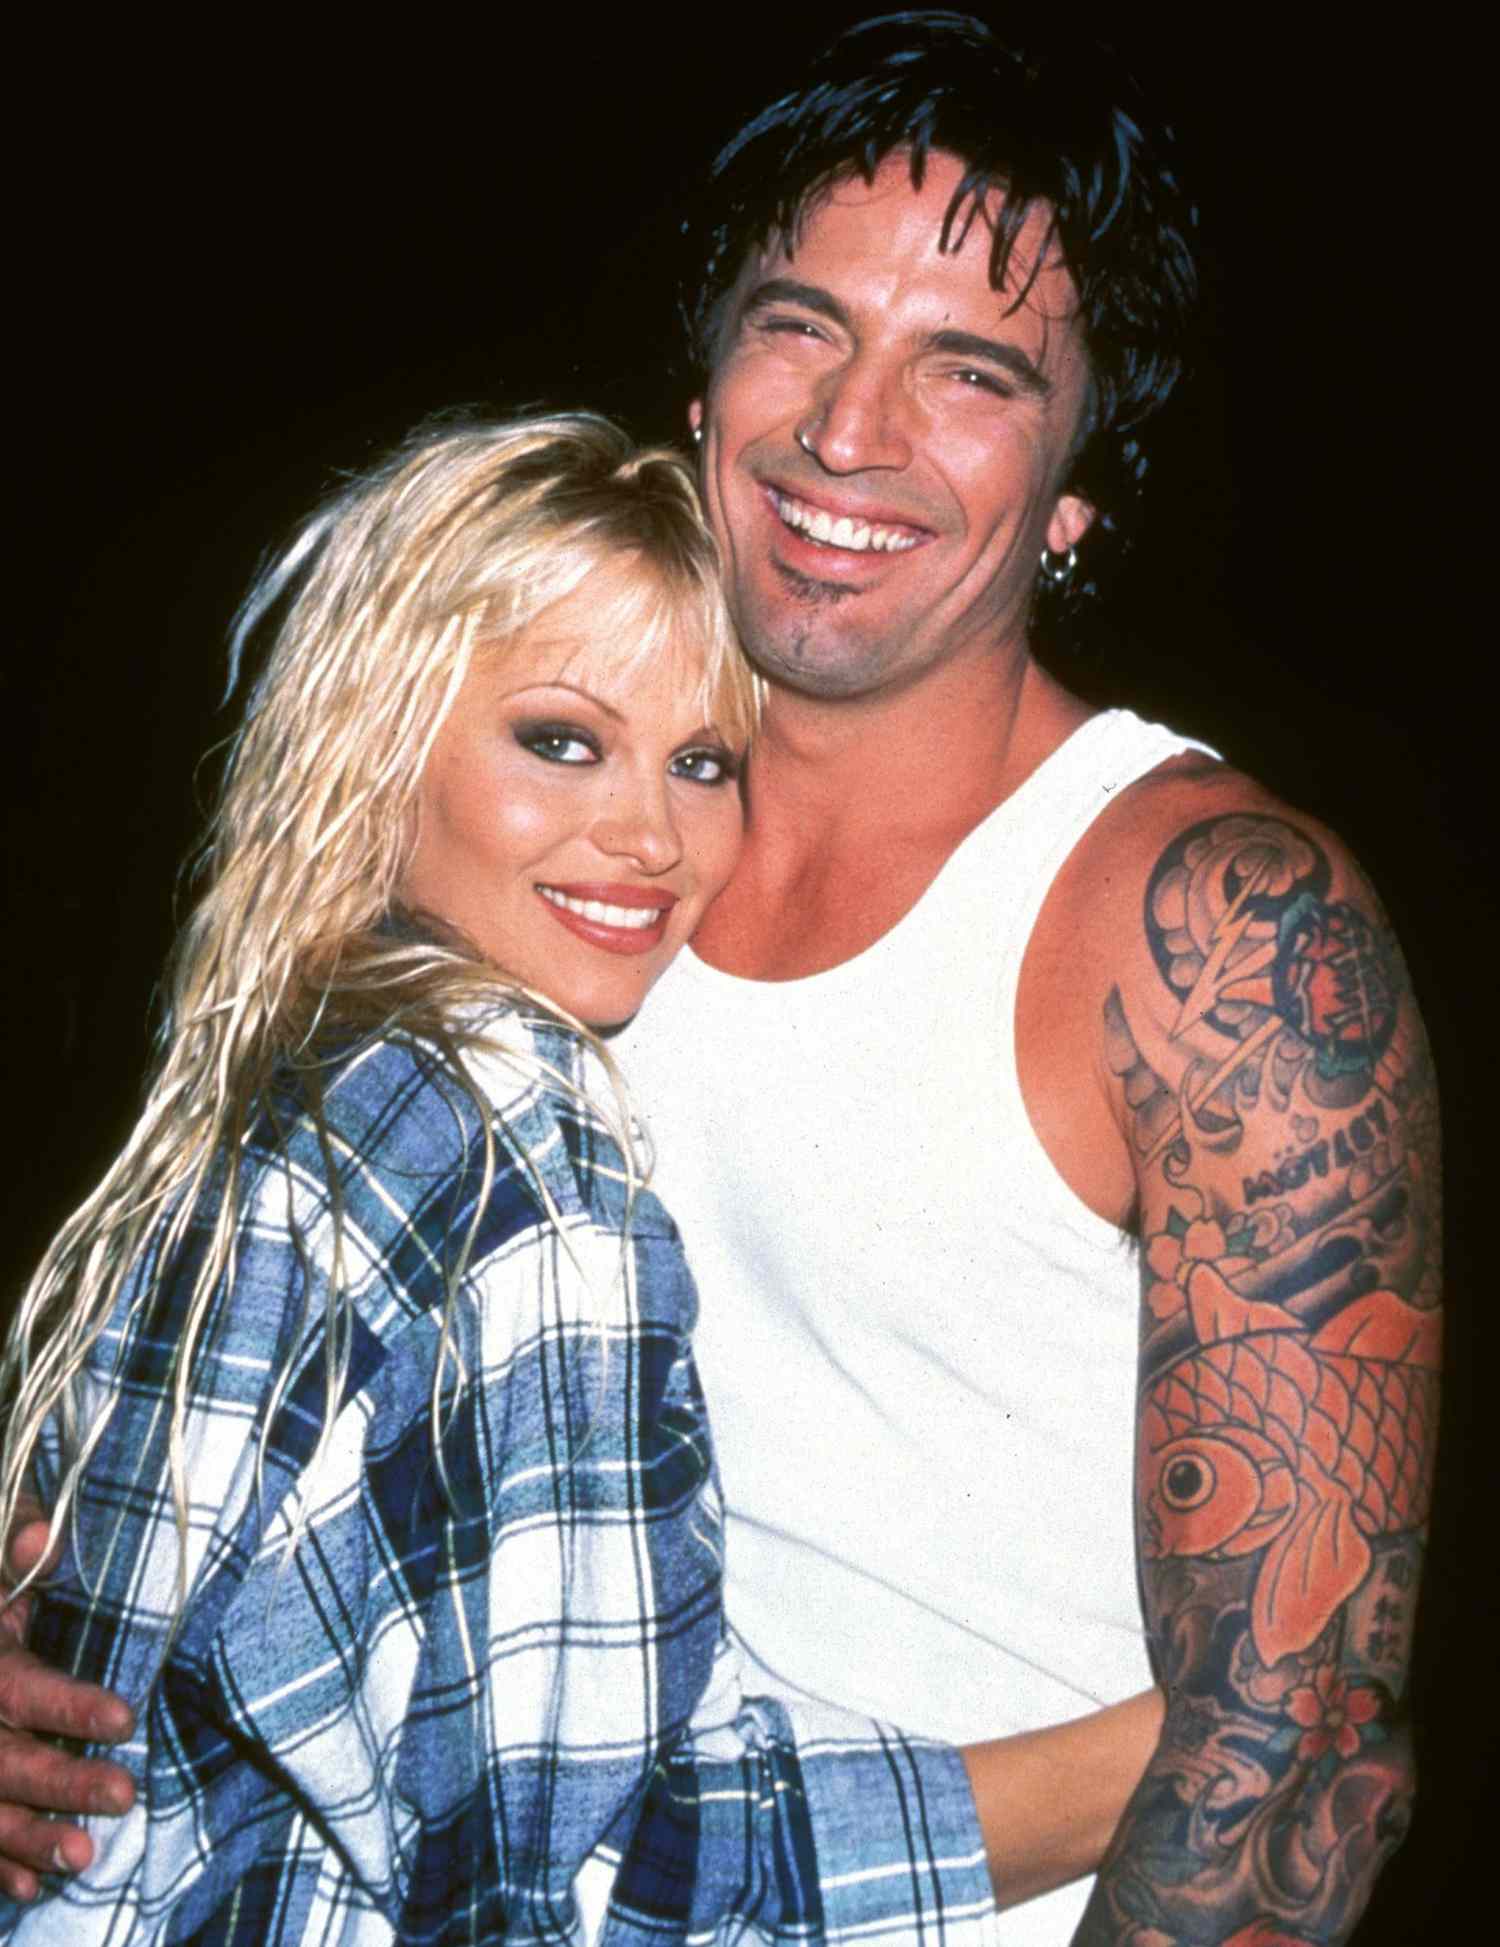 1996 File Photo of Pamela Anderson and Tommy Lee